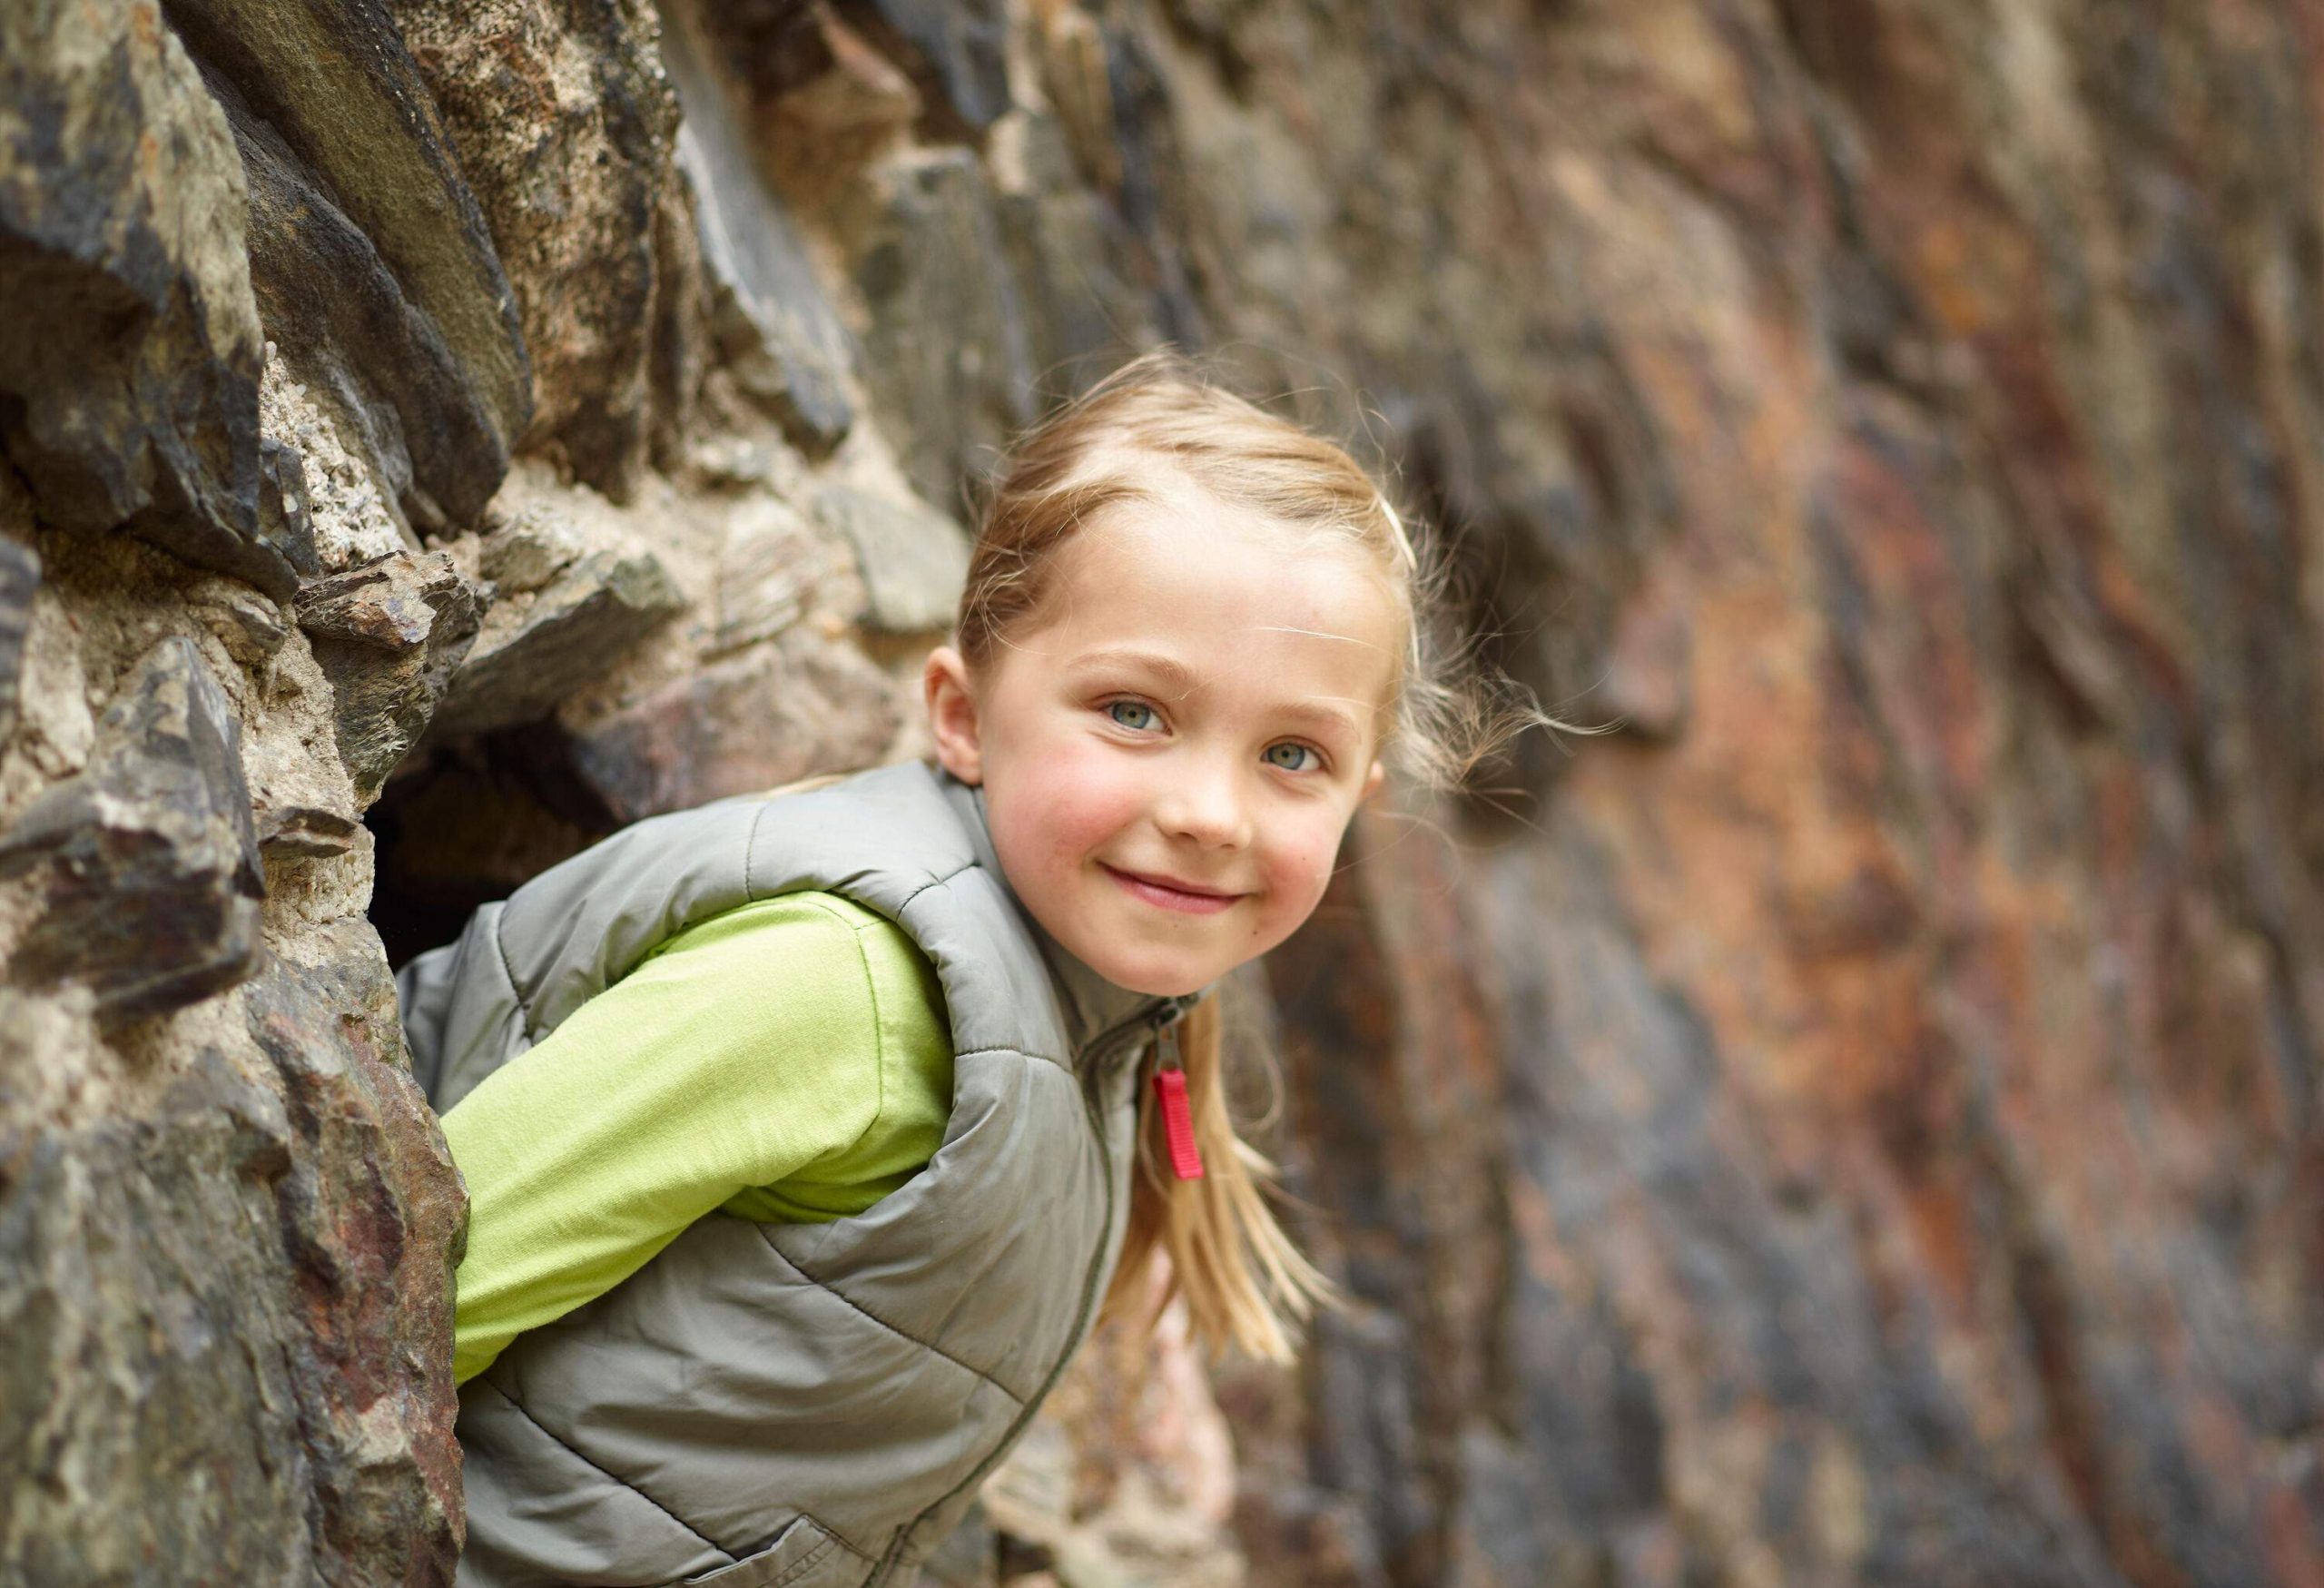 A happy little girl peeking out from a cave in a mountain and looking outside.